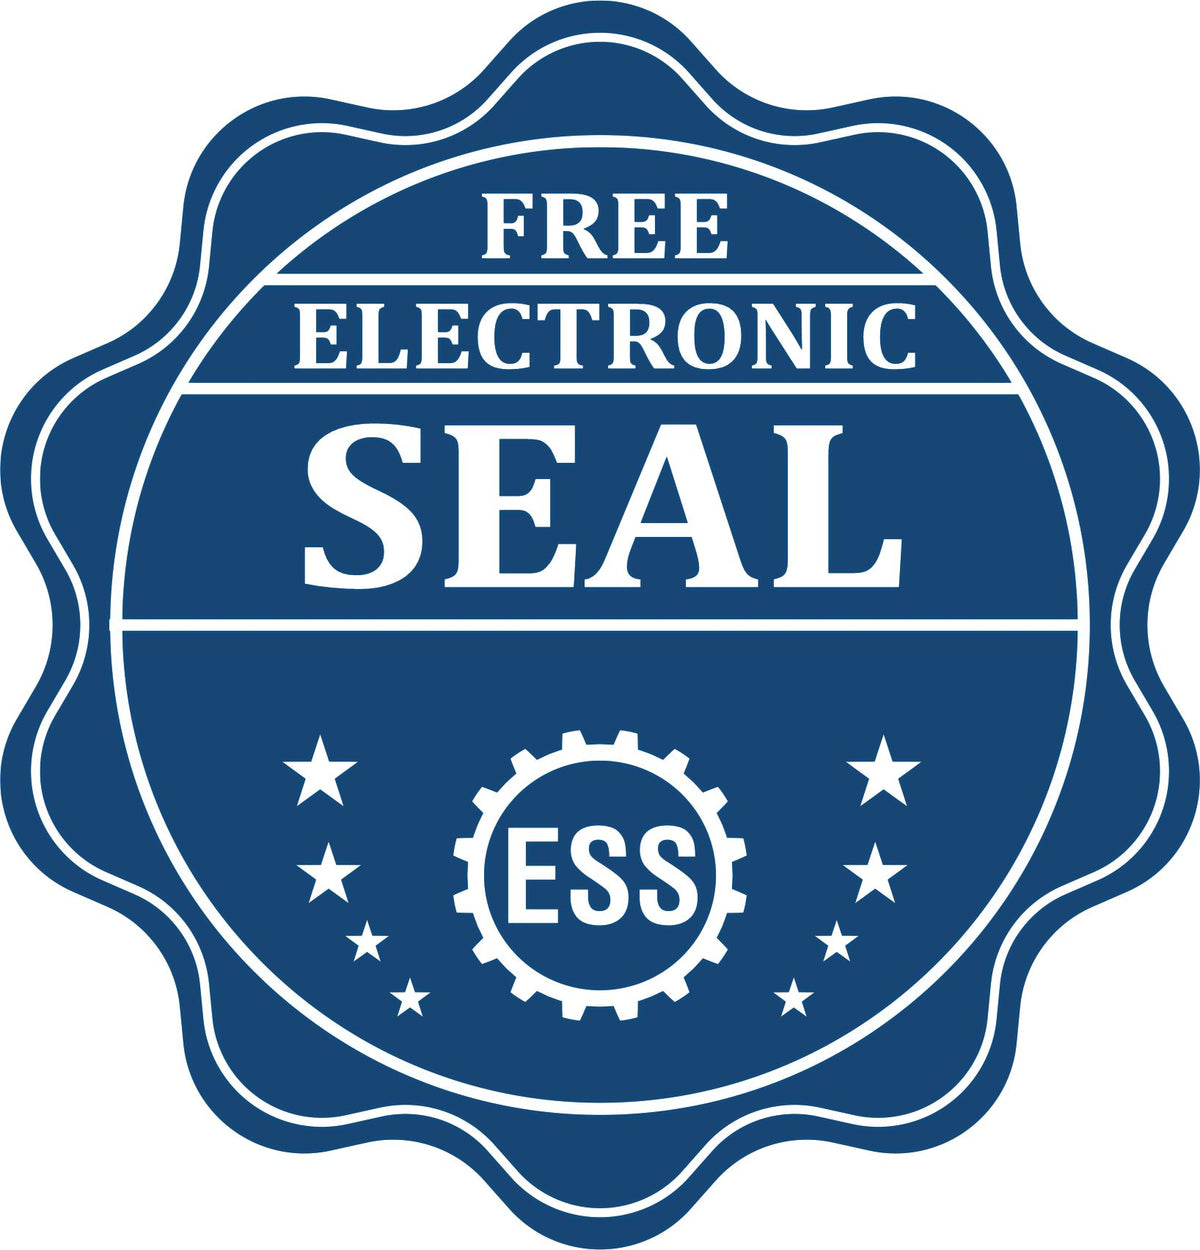 A badge showing a free electronic seal for the Gift Oregon Geologist Seal with stars and the ESS gear on the emblem.